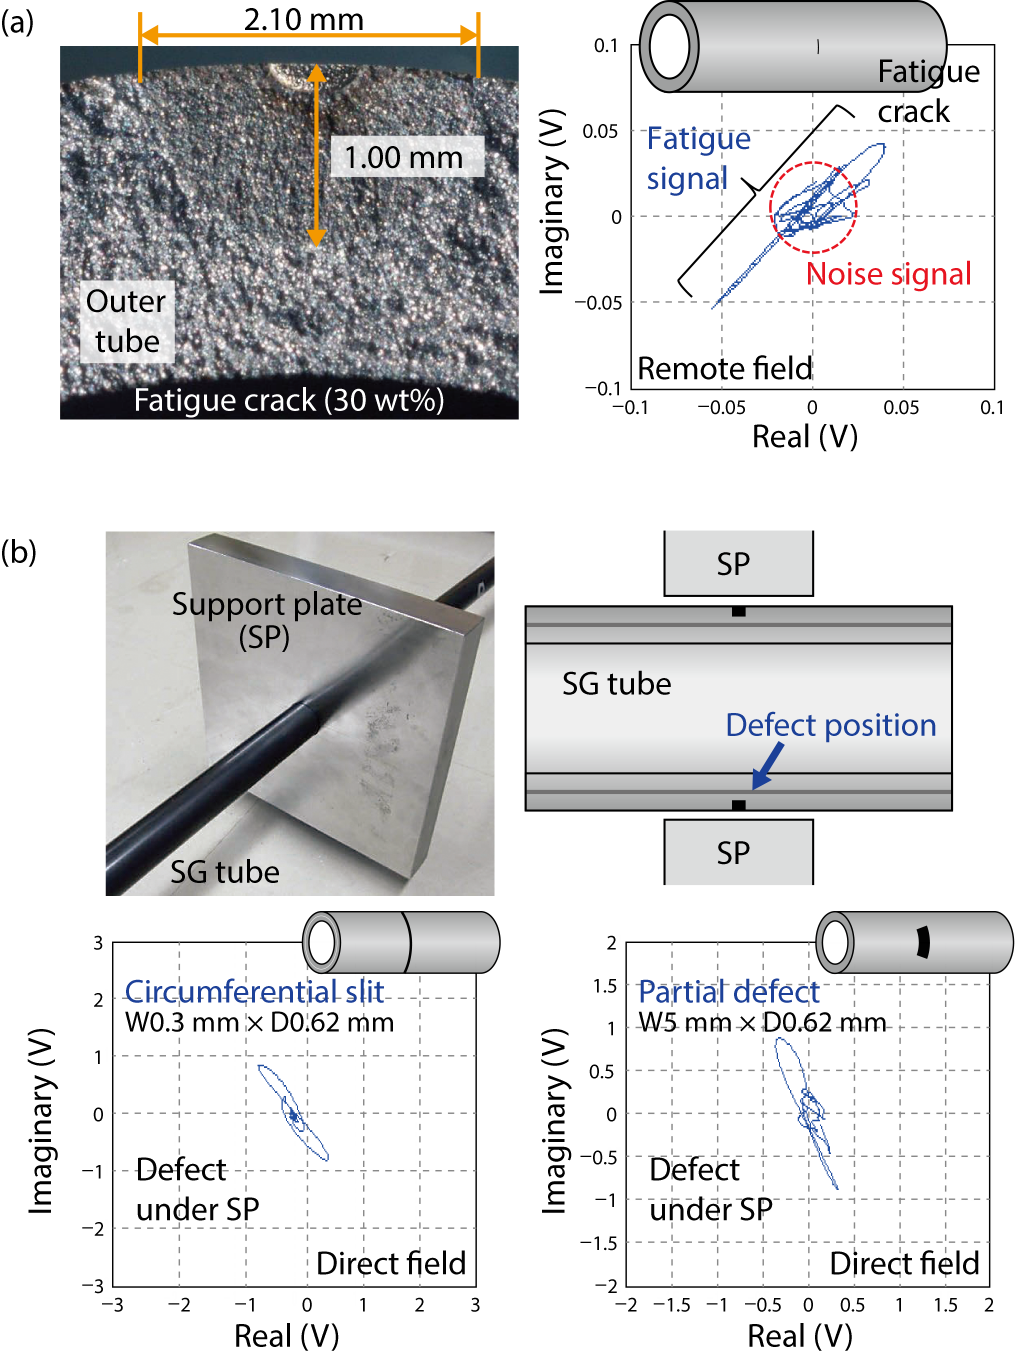 Fig.7-14  Detection of a fatigue crack by a multi-coil sensor (a) and defects under the support plate by a bobbin coil (b)